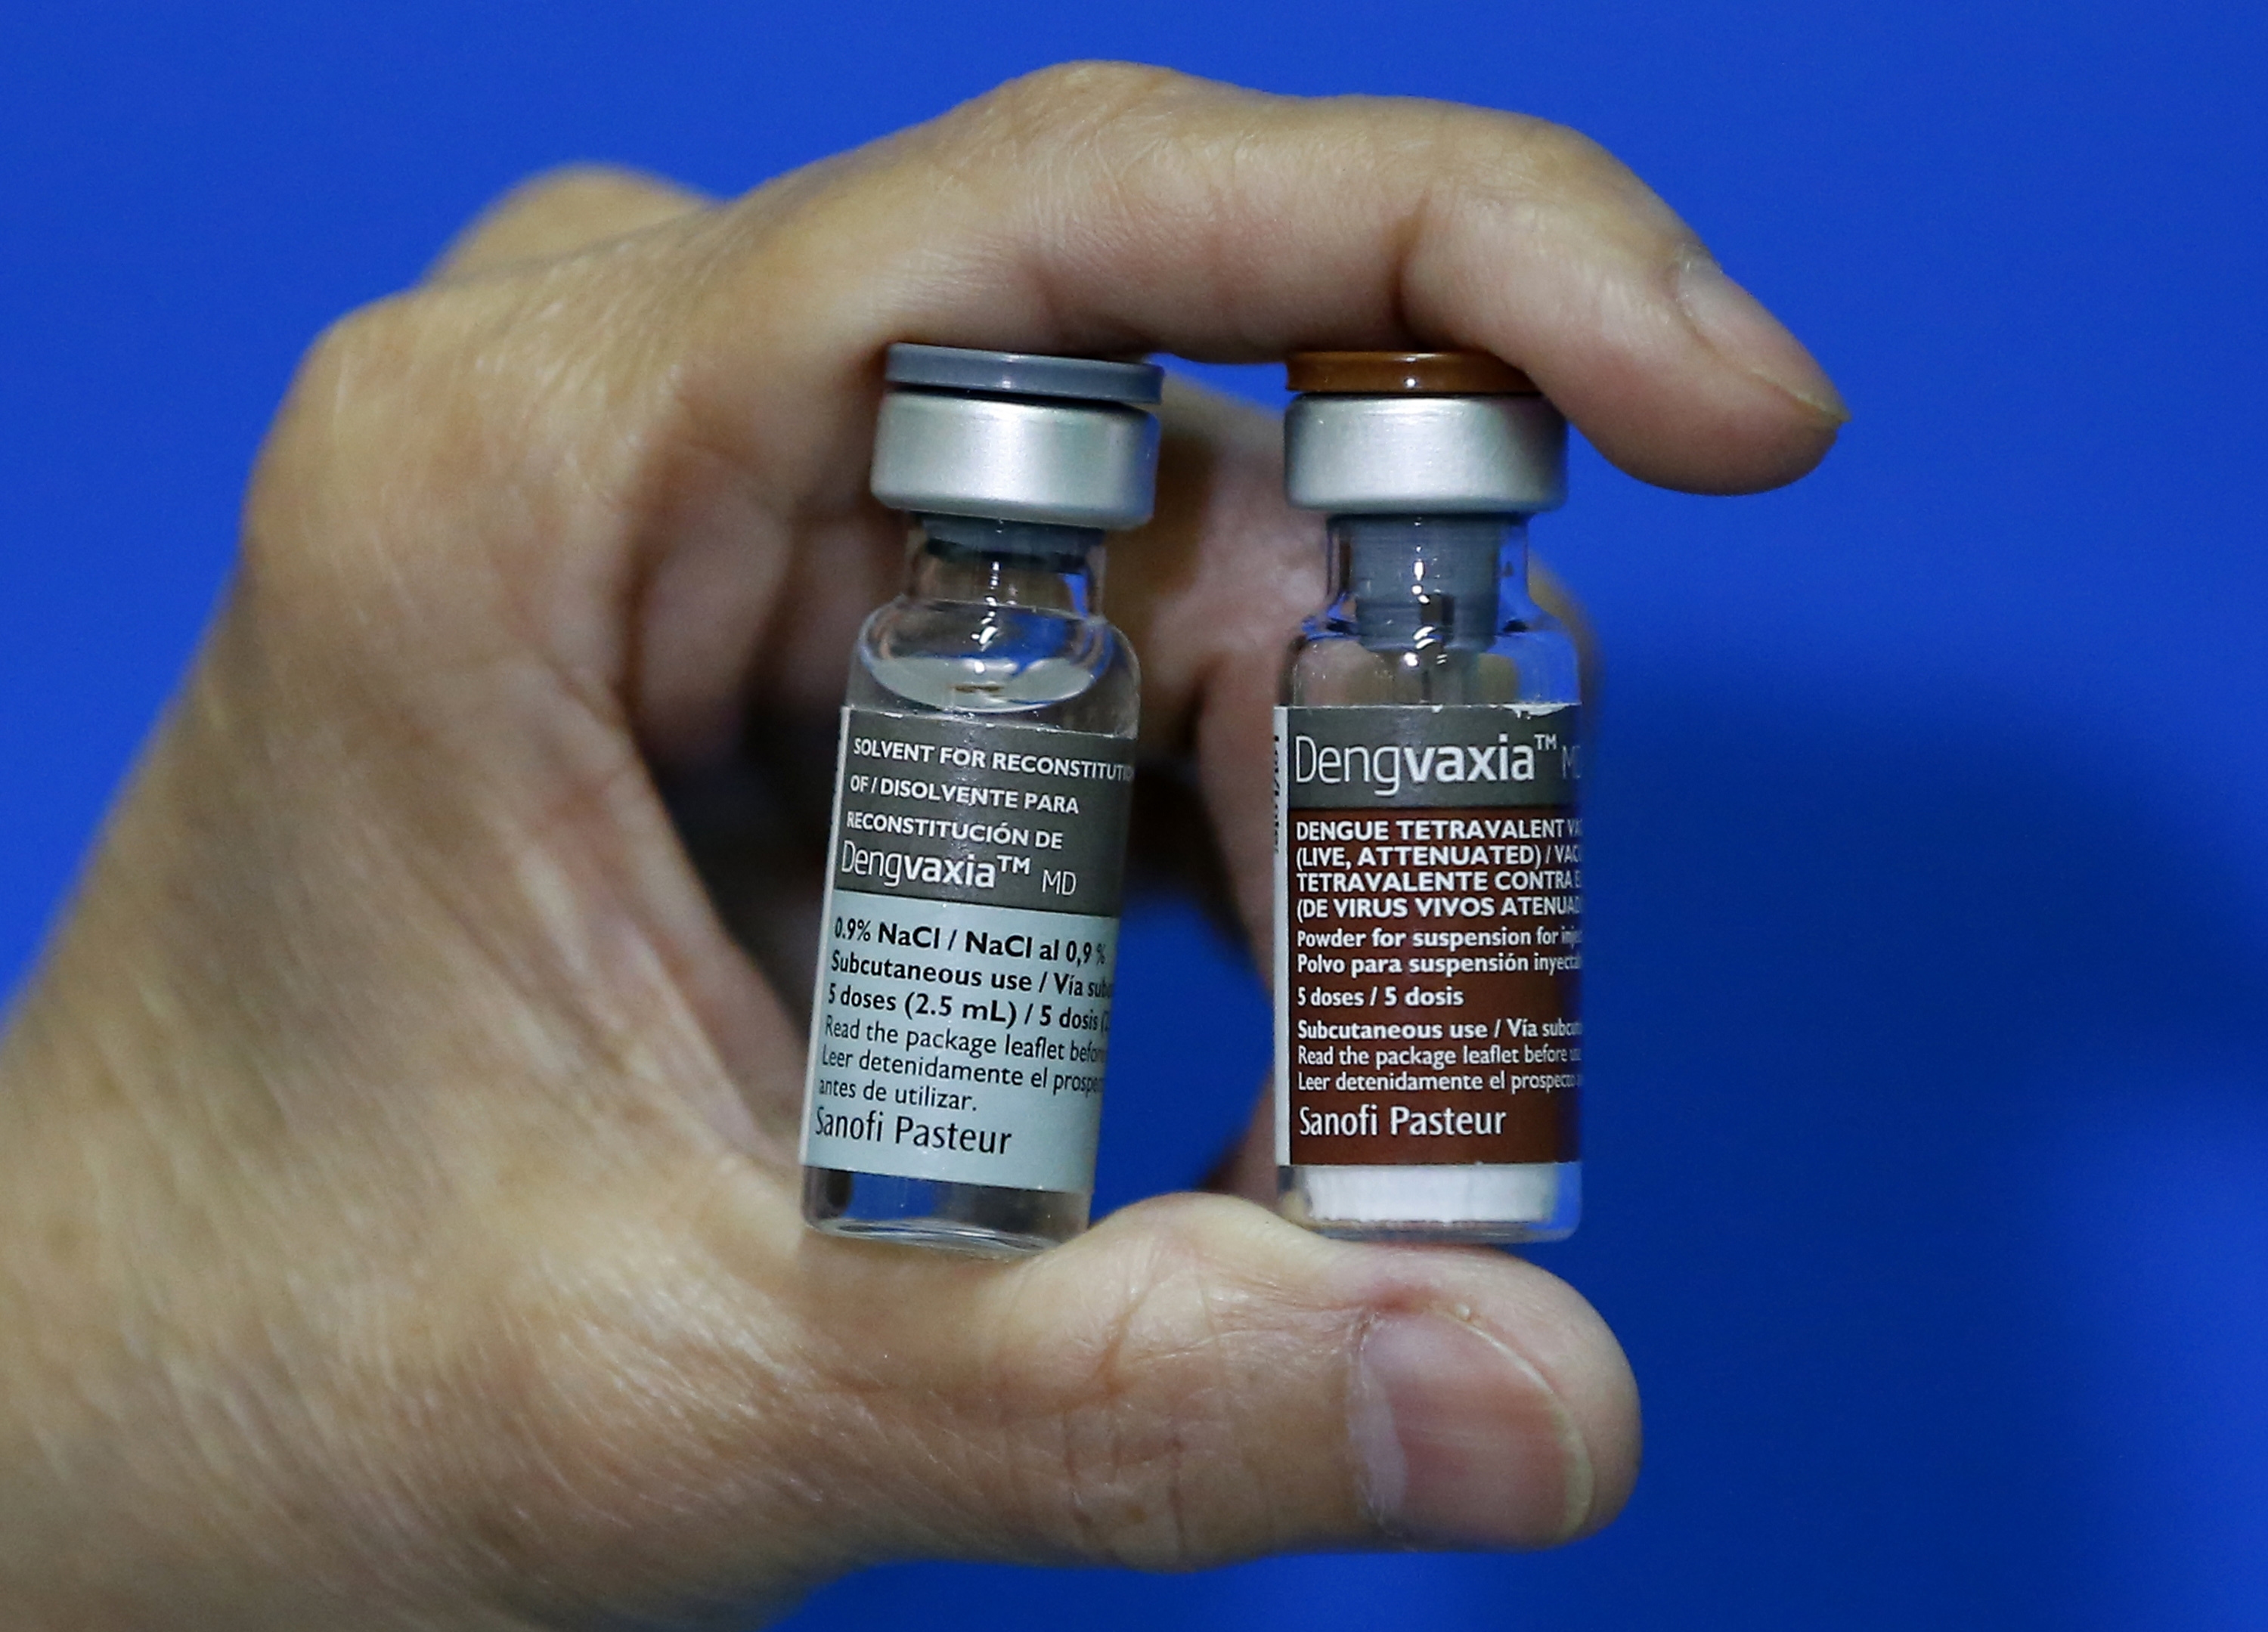 A Manila Health offricer displays a pair of vials of the anti-dengue vaccine Dengvaxia after being recalled from local government health centers Tuesday, Dec. 5, 2017 in Manila, Philippines. The controversial vaccine, manufactured by Sanofi Pasteur and administered to more than 700,000 Filipino children, was put on hold by the Philippines last week after new study findings showed it posed risks of severe cases in people without previous infection. (AP Photo/Bullit Marquez)